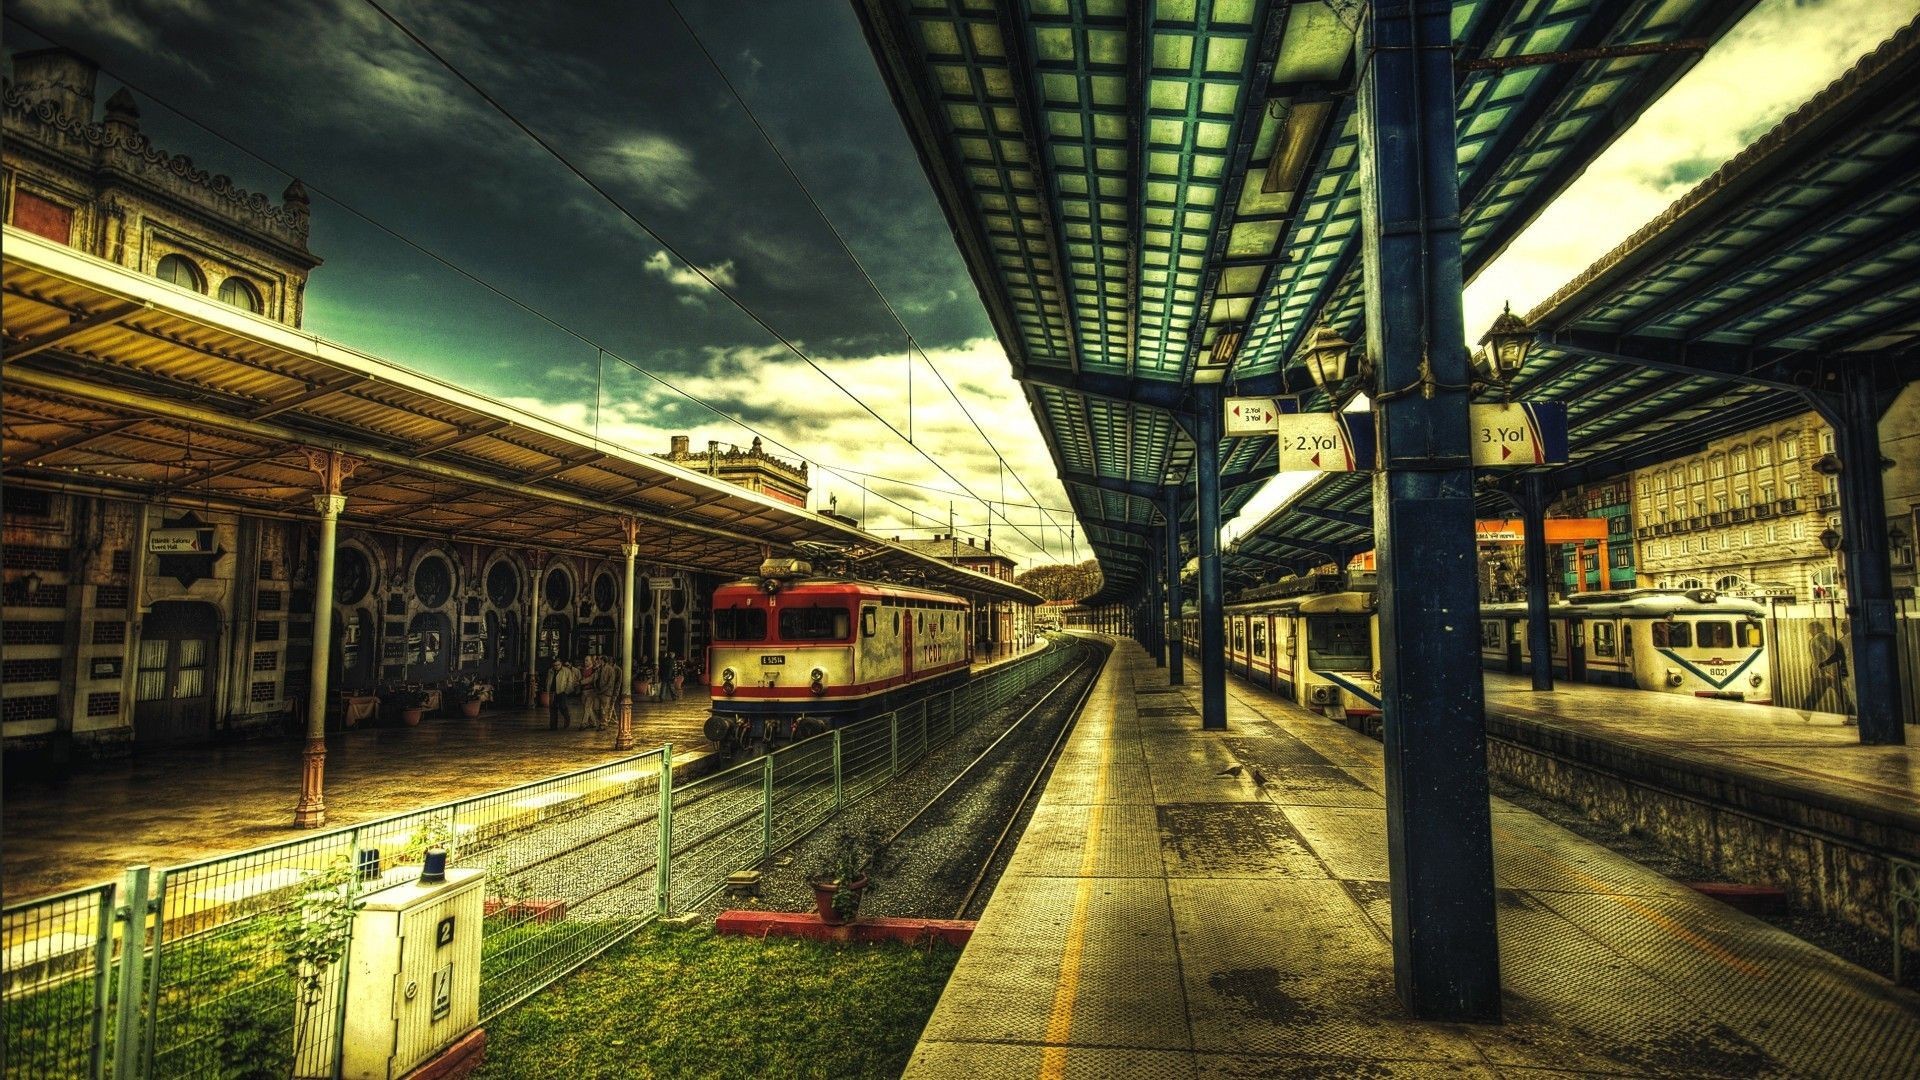 1920x1080 Other: Train Station Hdr Platform Clouds Trains Tracks Photography .